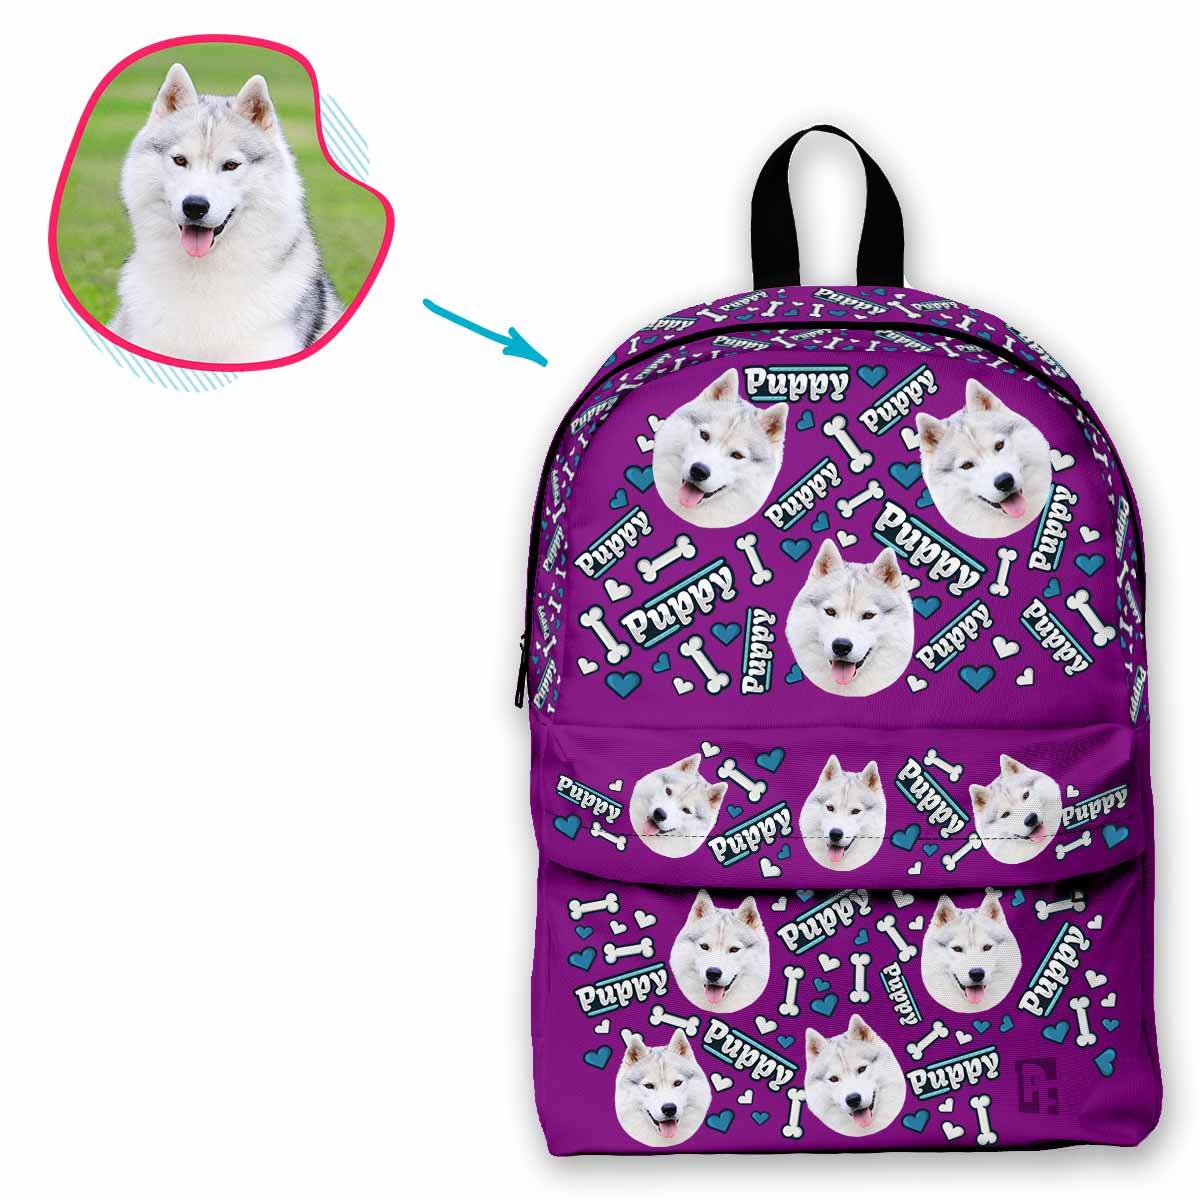 purple Puppy classic backpack personalized with photo of face printed on it